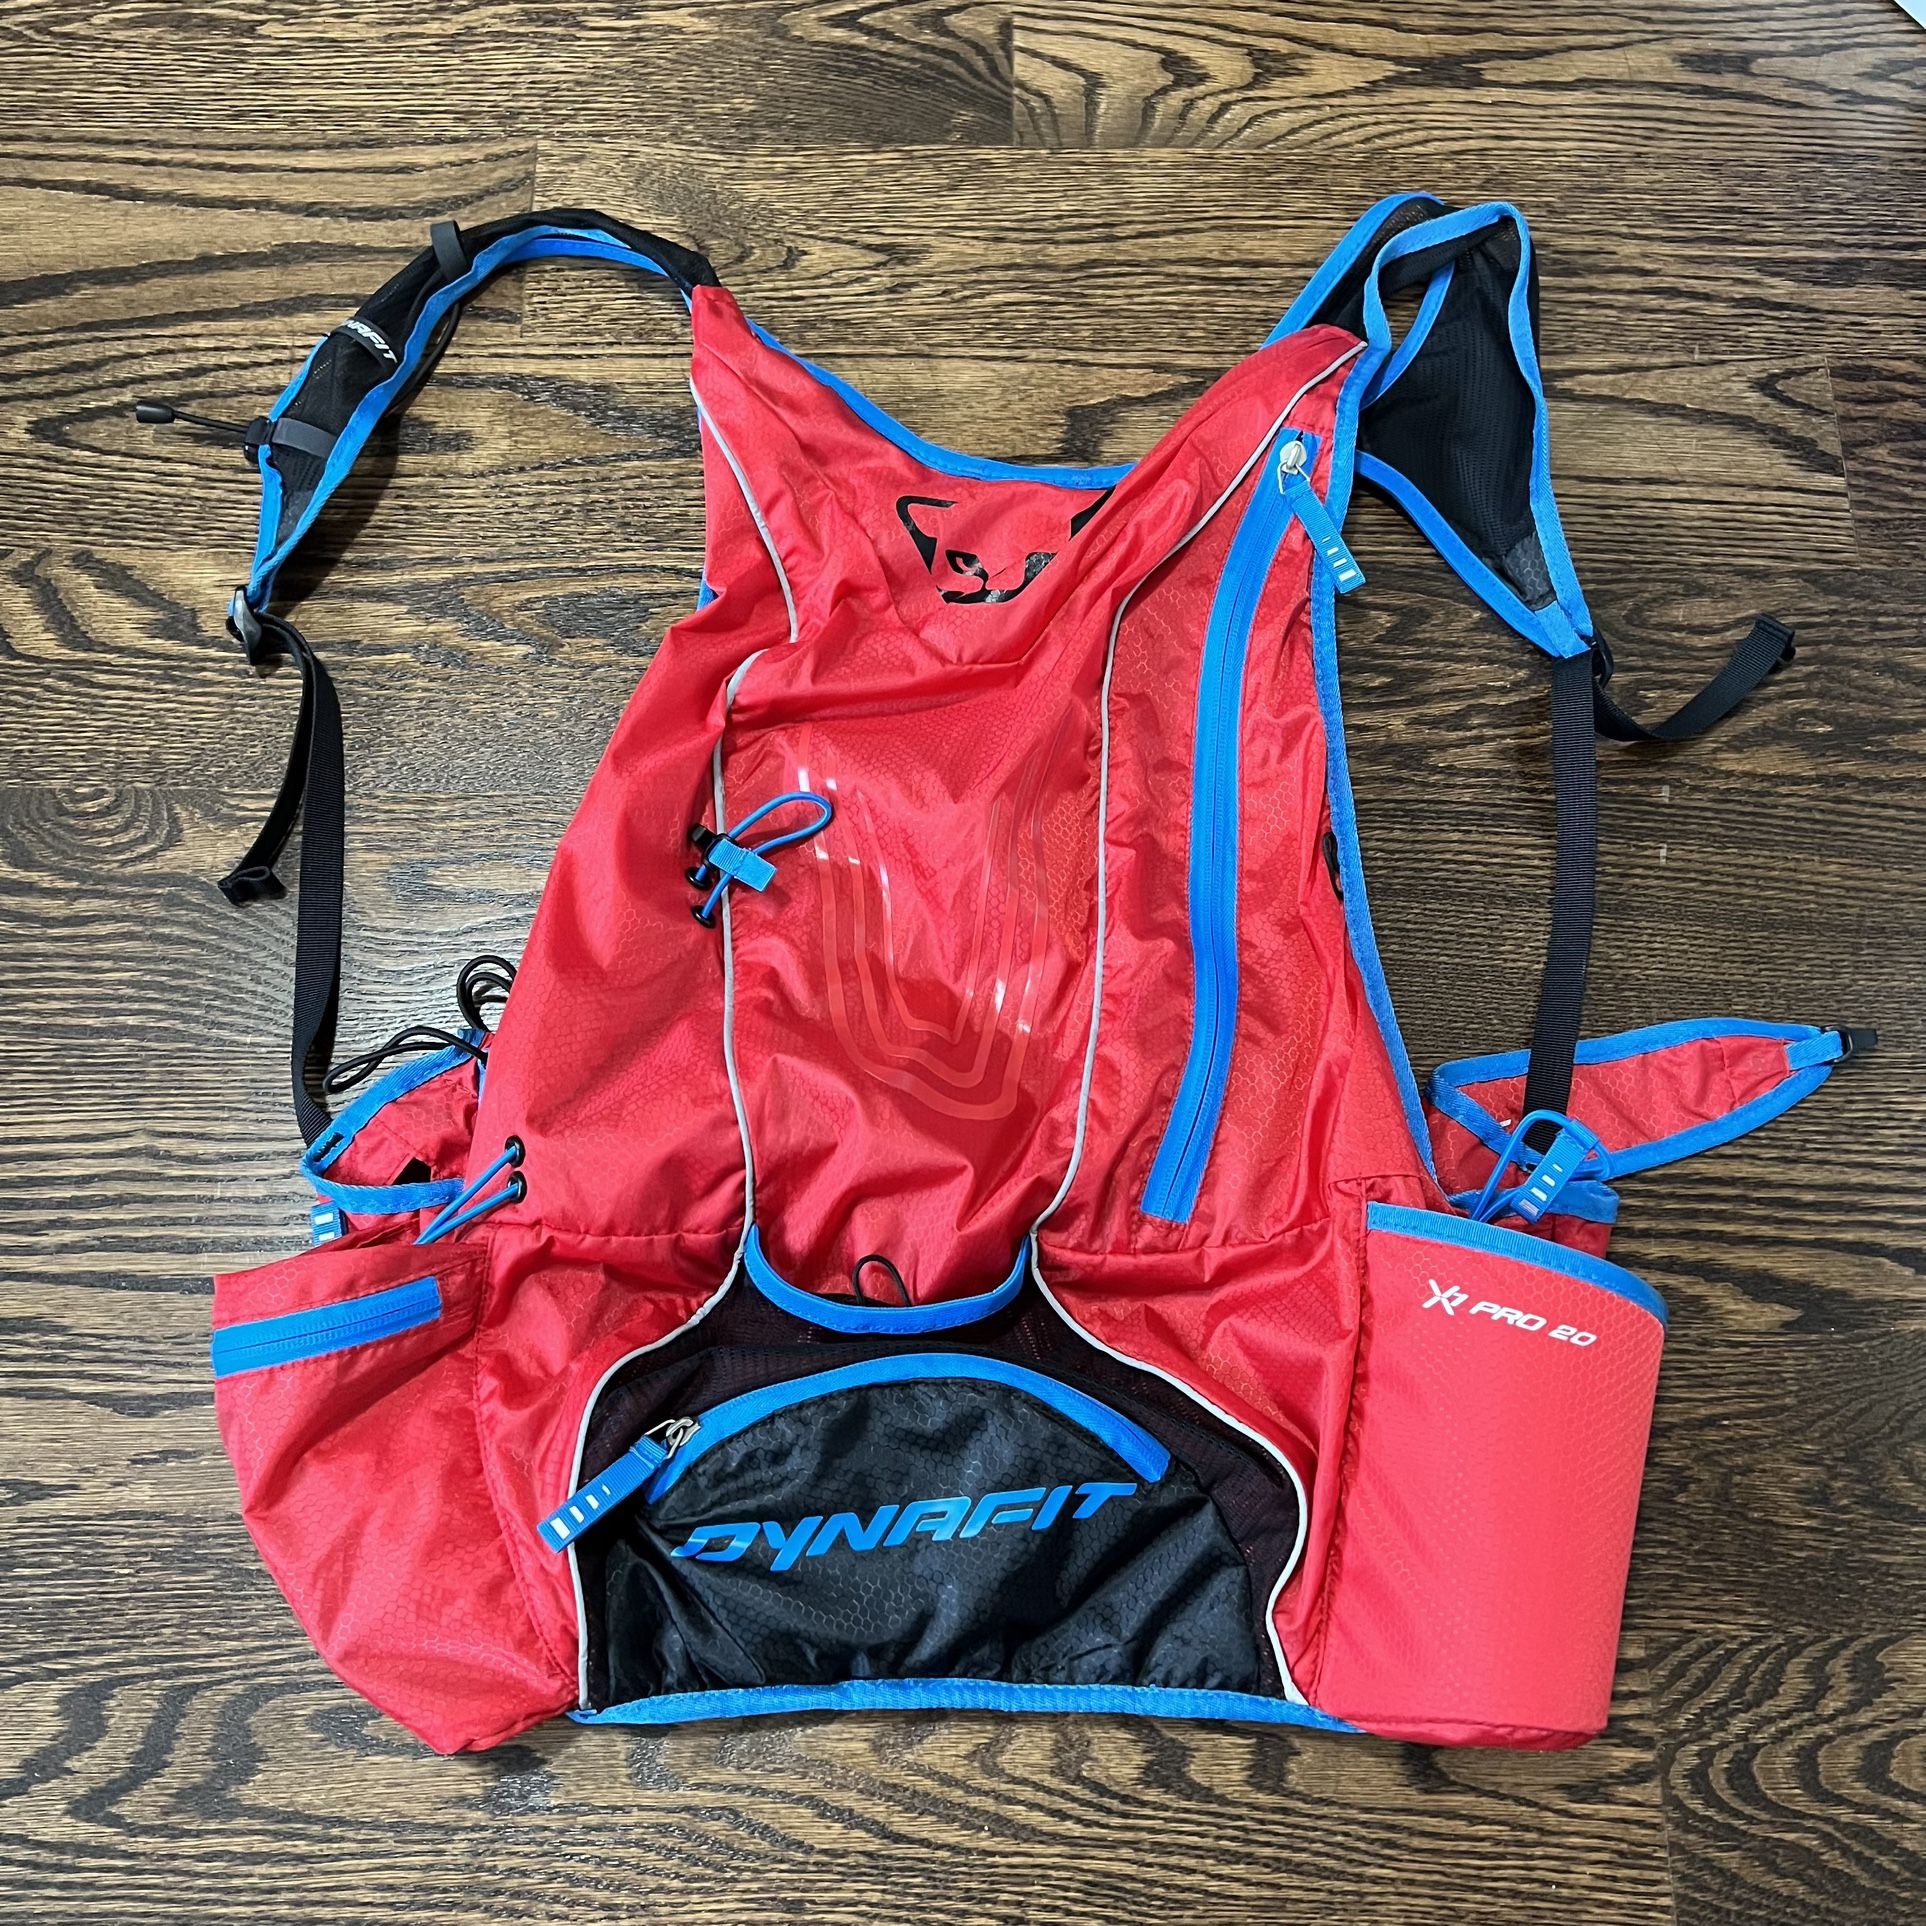 Dynafit X7 Pro 20 H2O Athletic Trail Running Red Hydration Backpack Bag